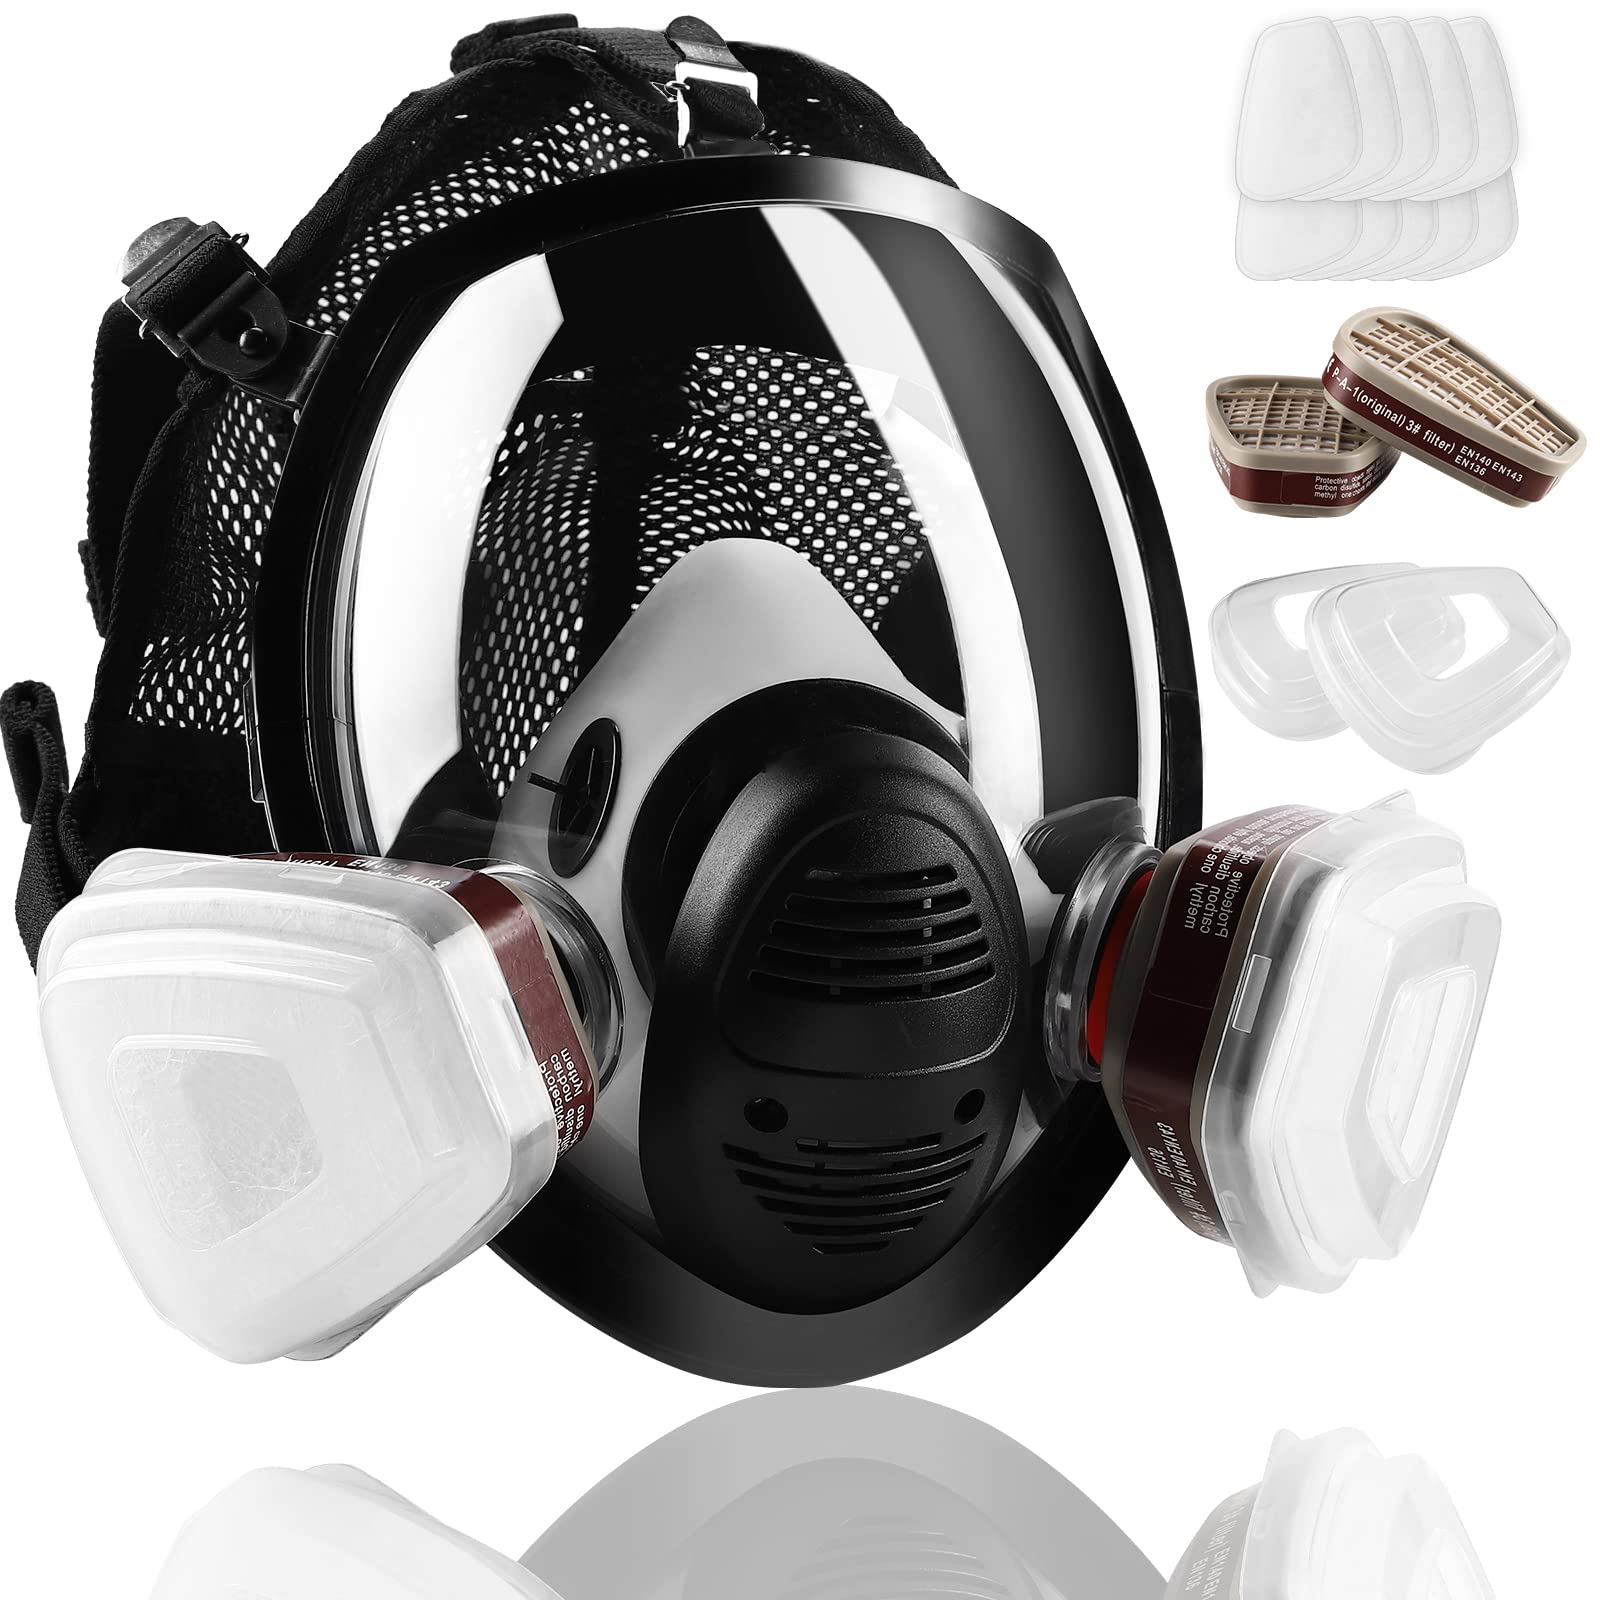 Full Face Gas Respirator Mask Gas Masks Survival Nuclear And Chemical With 6001 Activated Carbon 9335